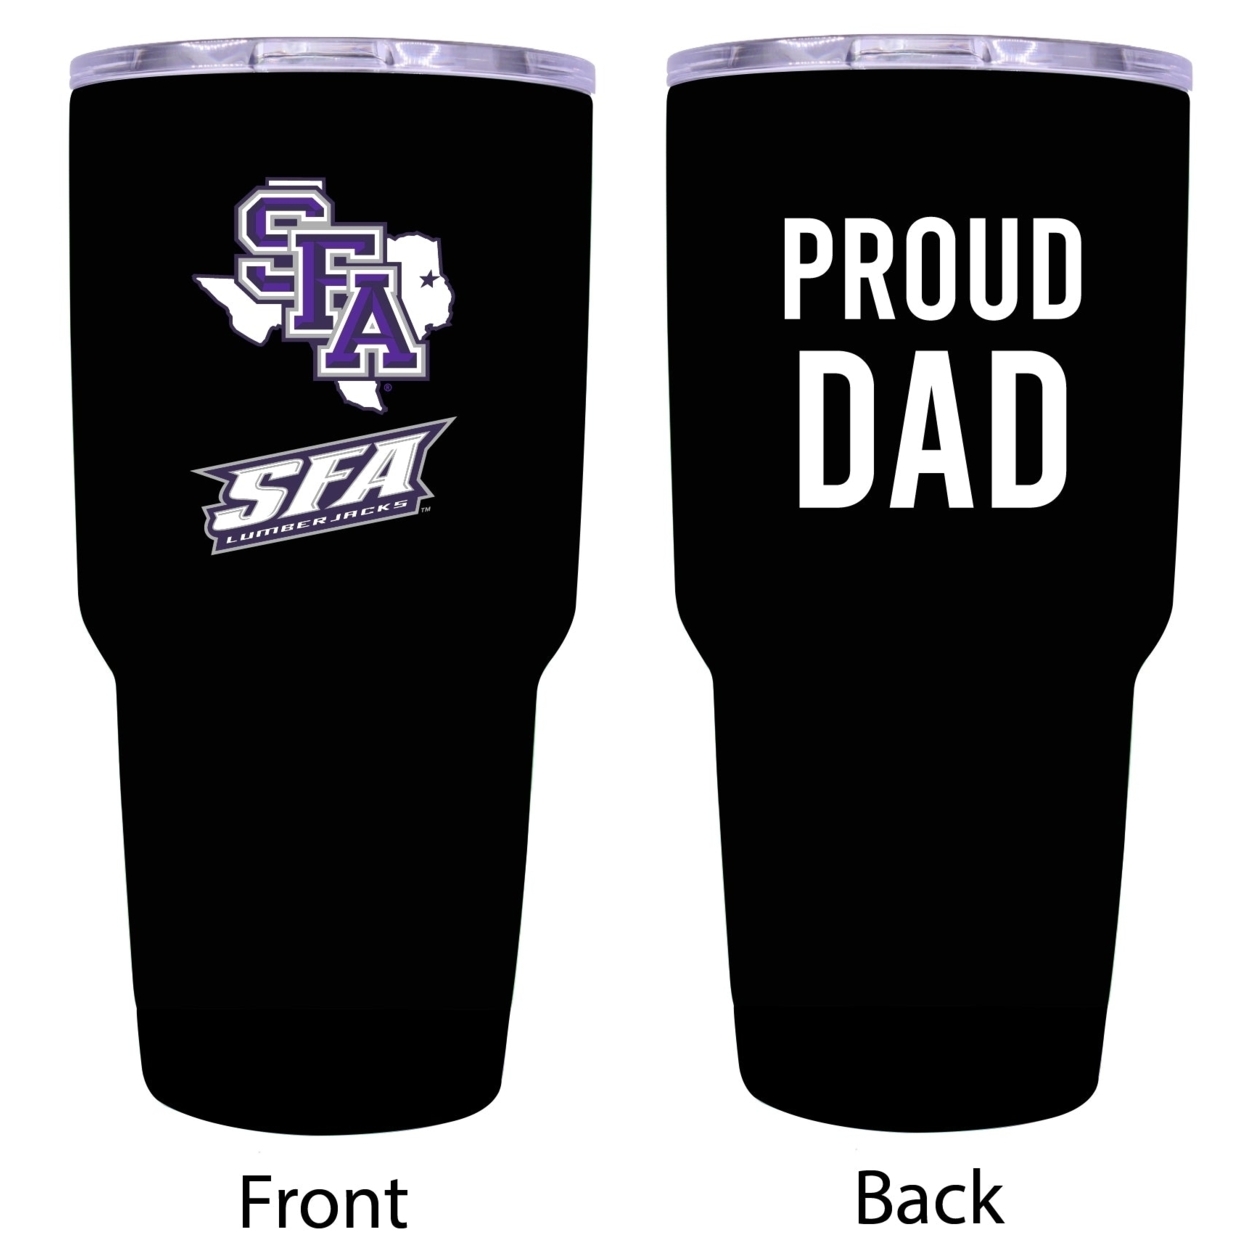 Stephen F. Austin State University Proud Dad 24 Oz Insulated Stainless Steel Tumblers Choose Your Color.